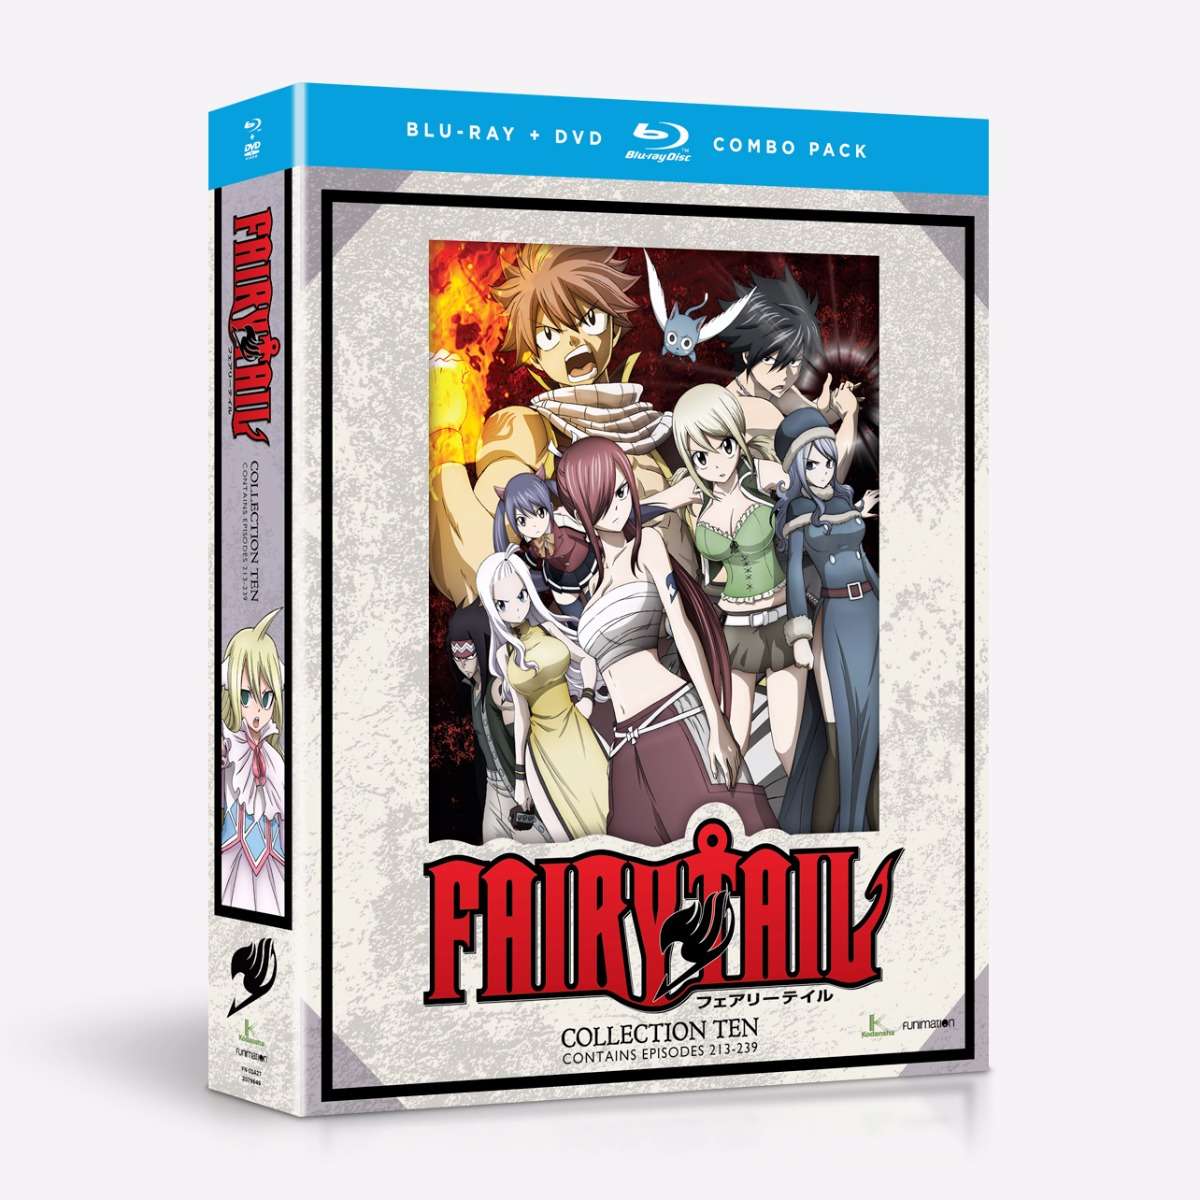 Fairy Tail - Collection 10 - Blu-ray + DVD image count 0